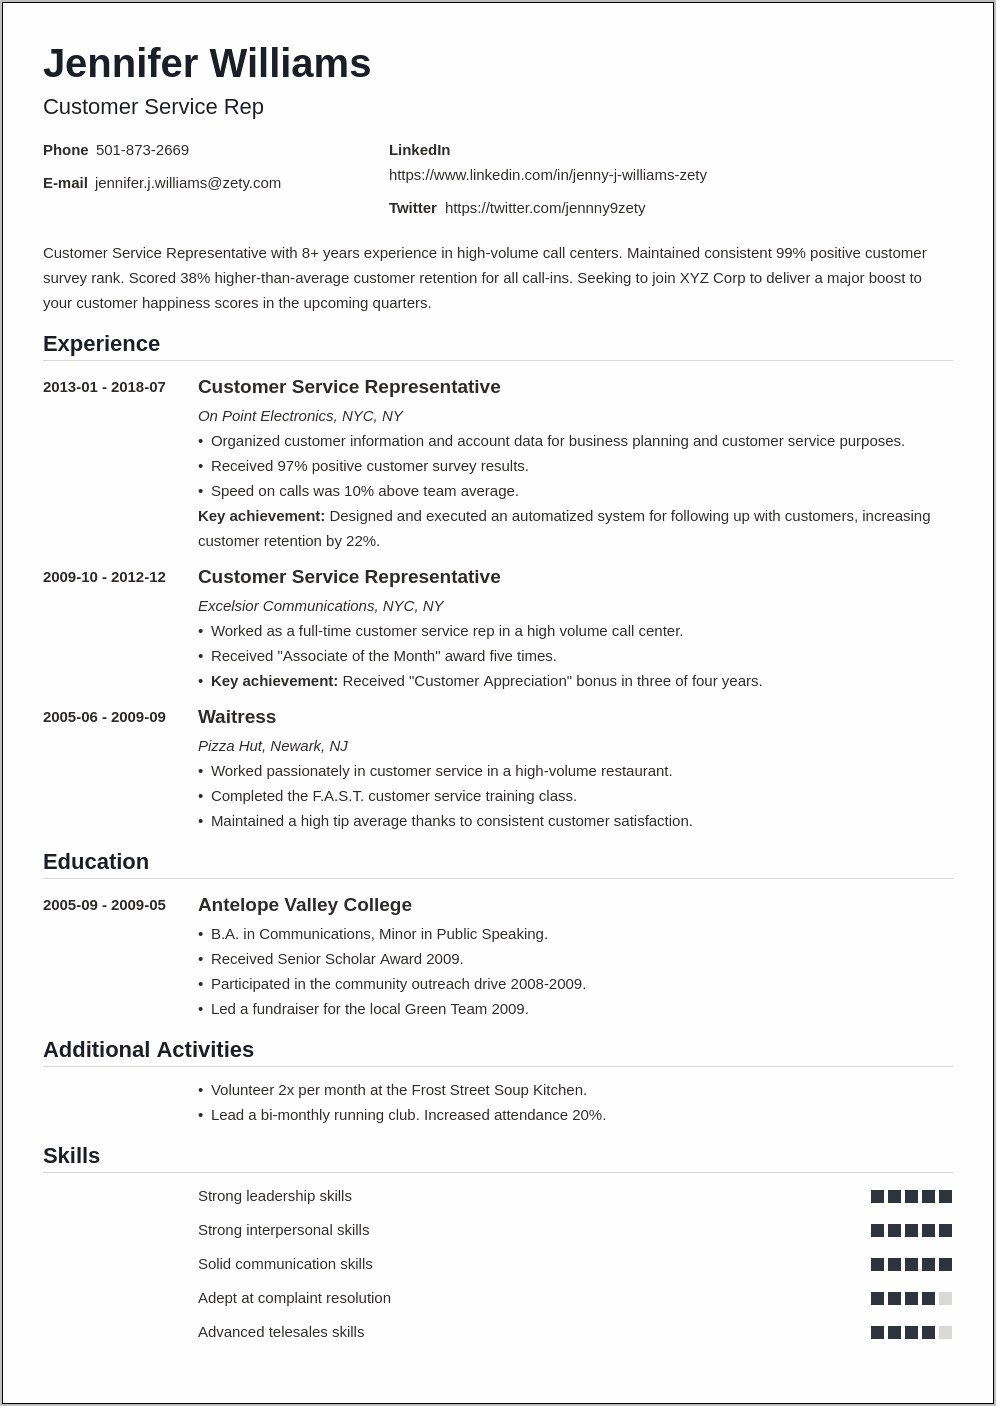 Jobs Skills To Use On A Resume